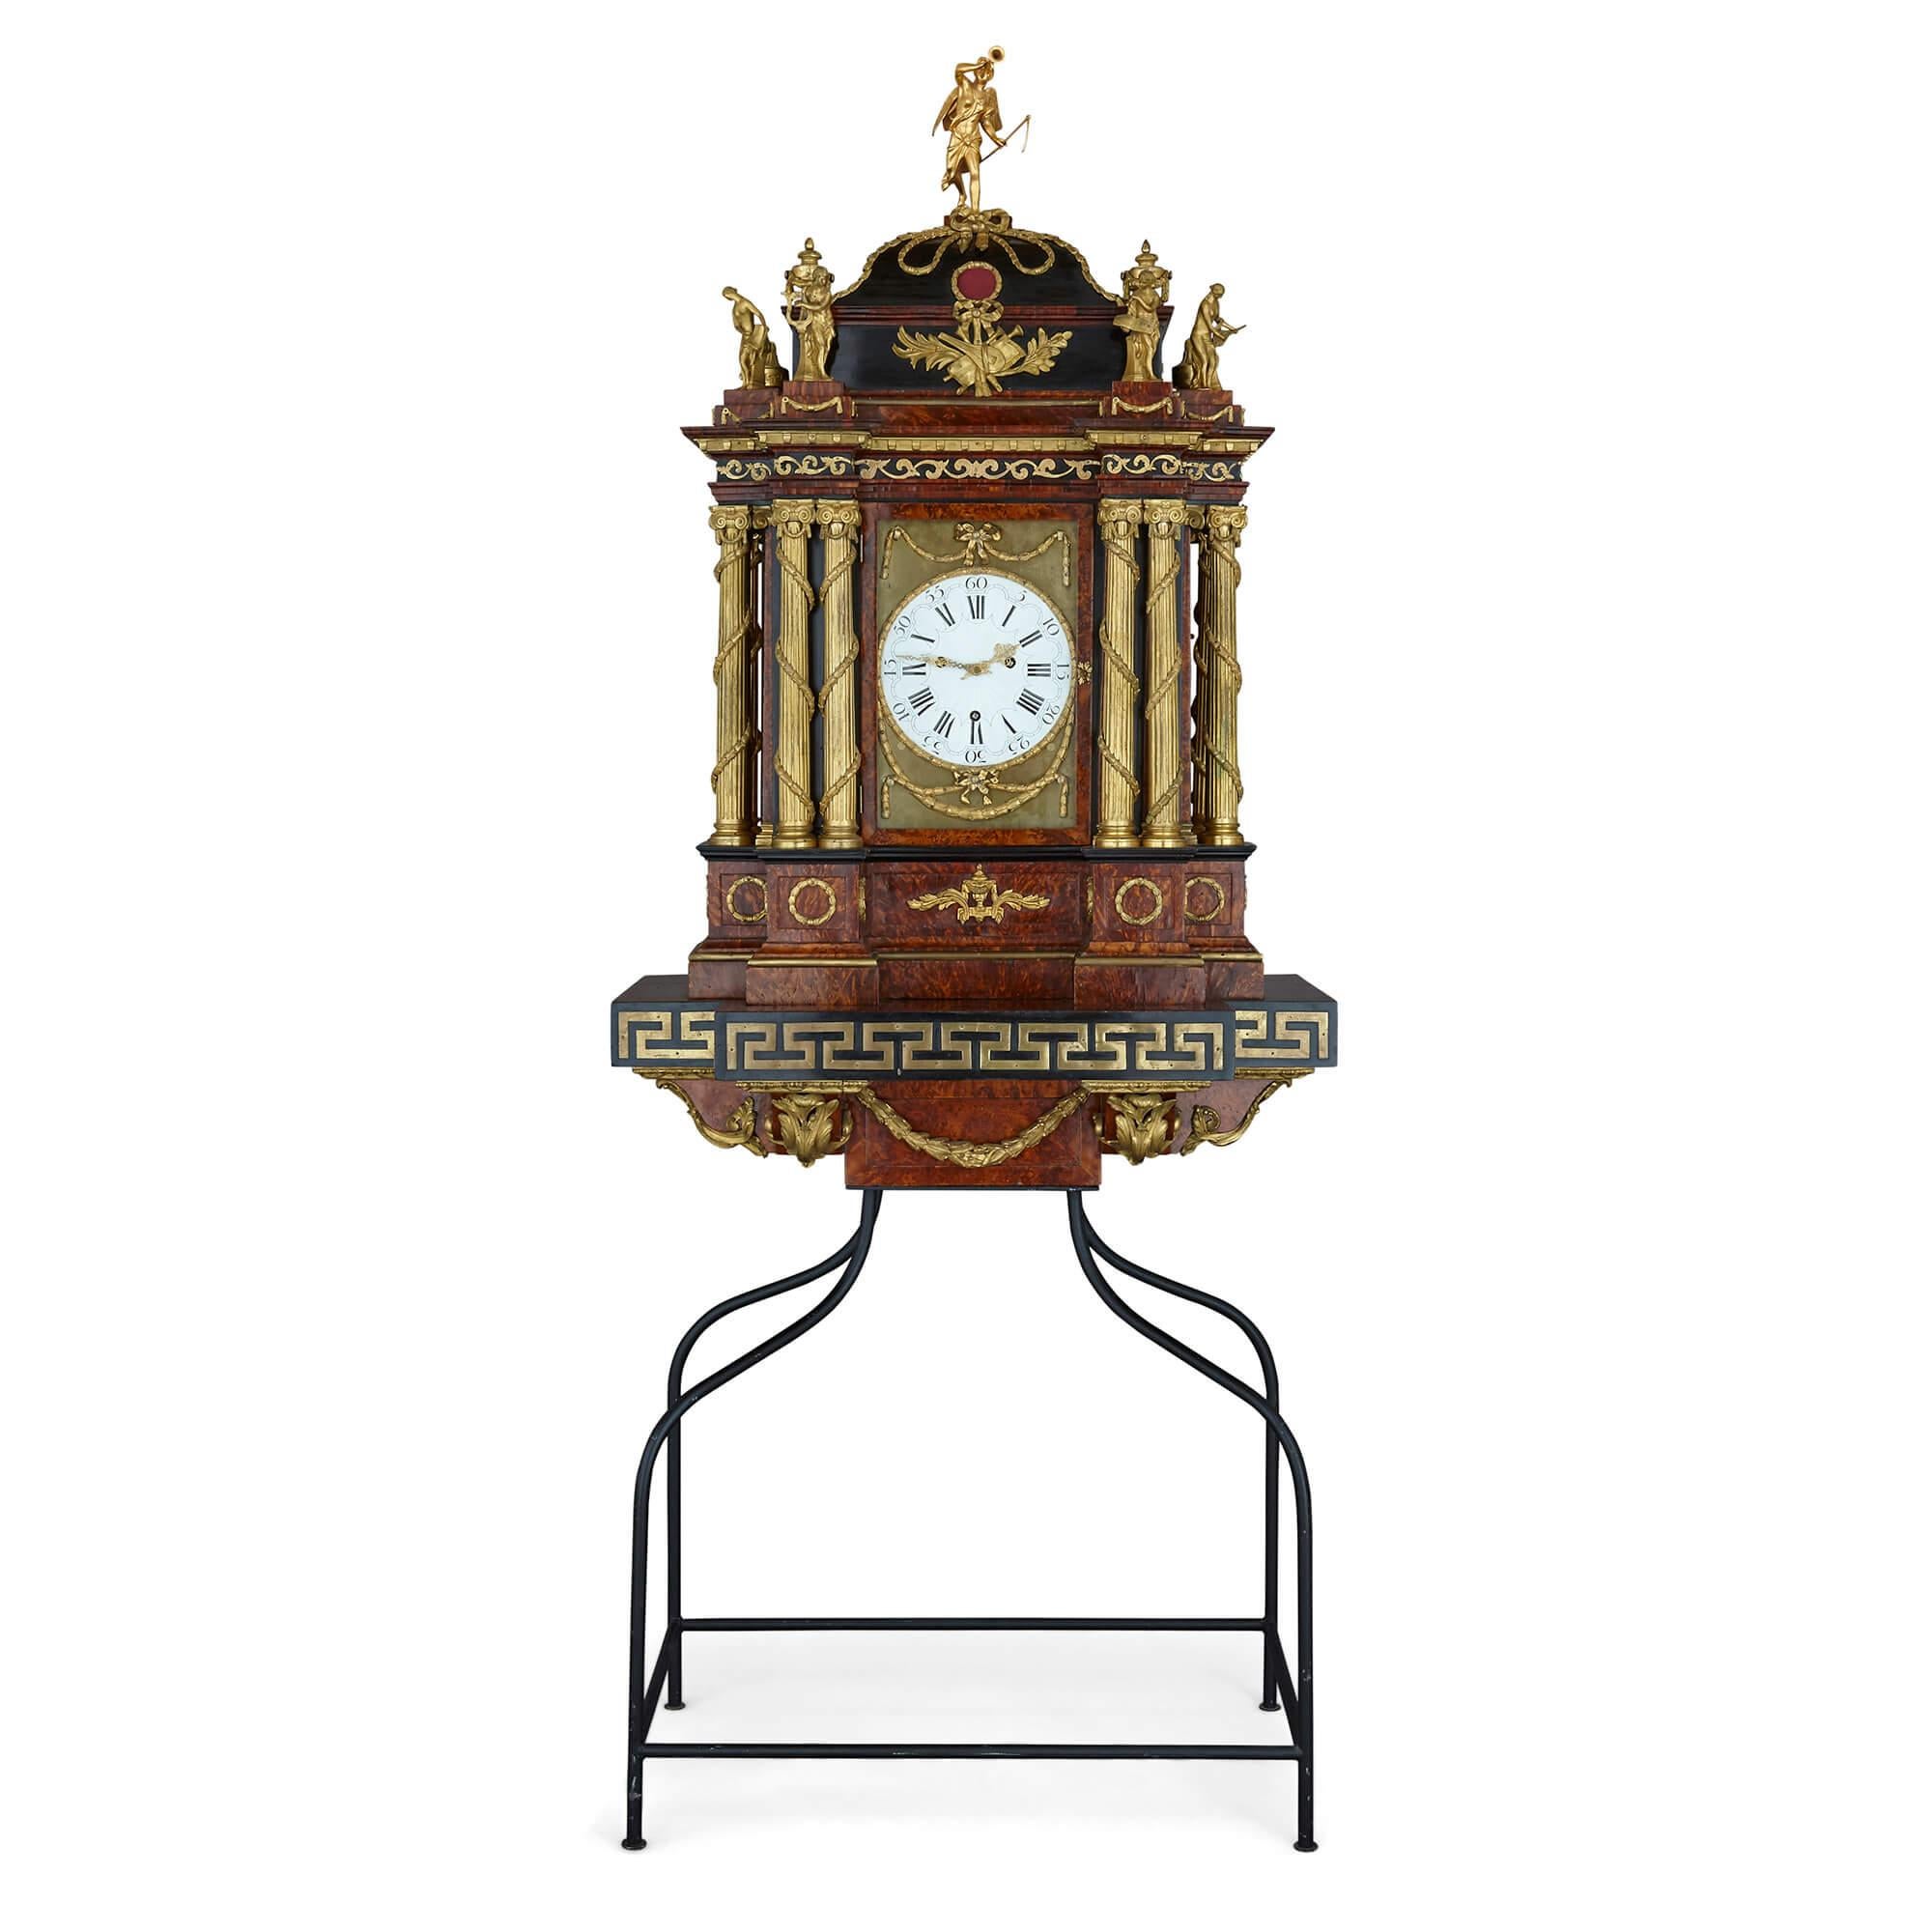 Large Baroque style Austrian ormolu mounted musical clock
Austrian, early 19th Century
Total height: 211cm
Clock: Height 135cm, width 86cm, depth 52
Stand: Height 76cm, width 81cm, depth 48cm

The clock is designed in the Baroque style and in